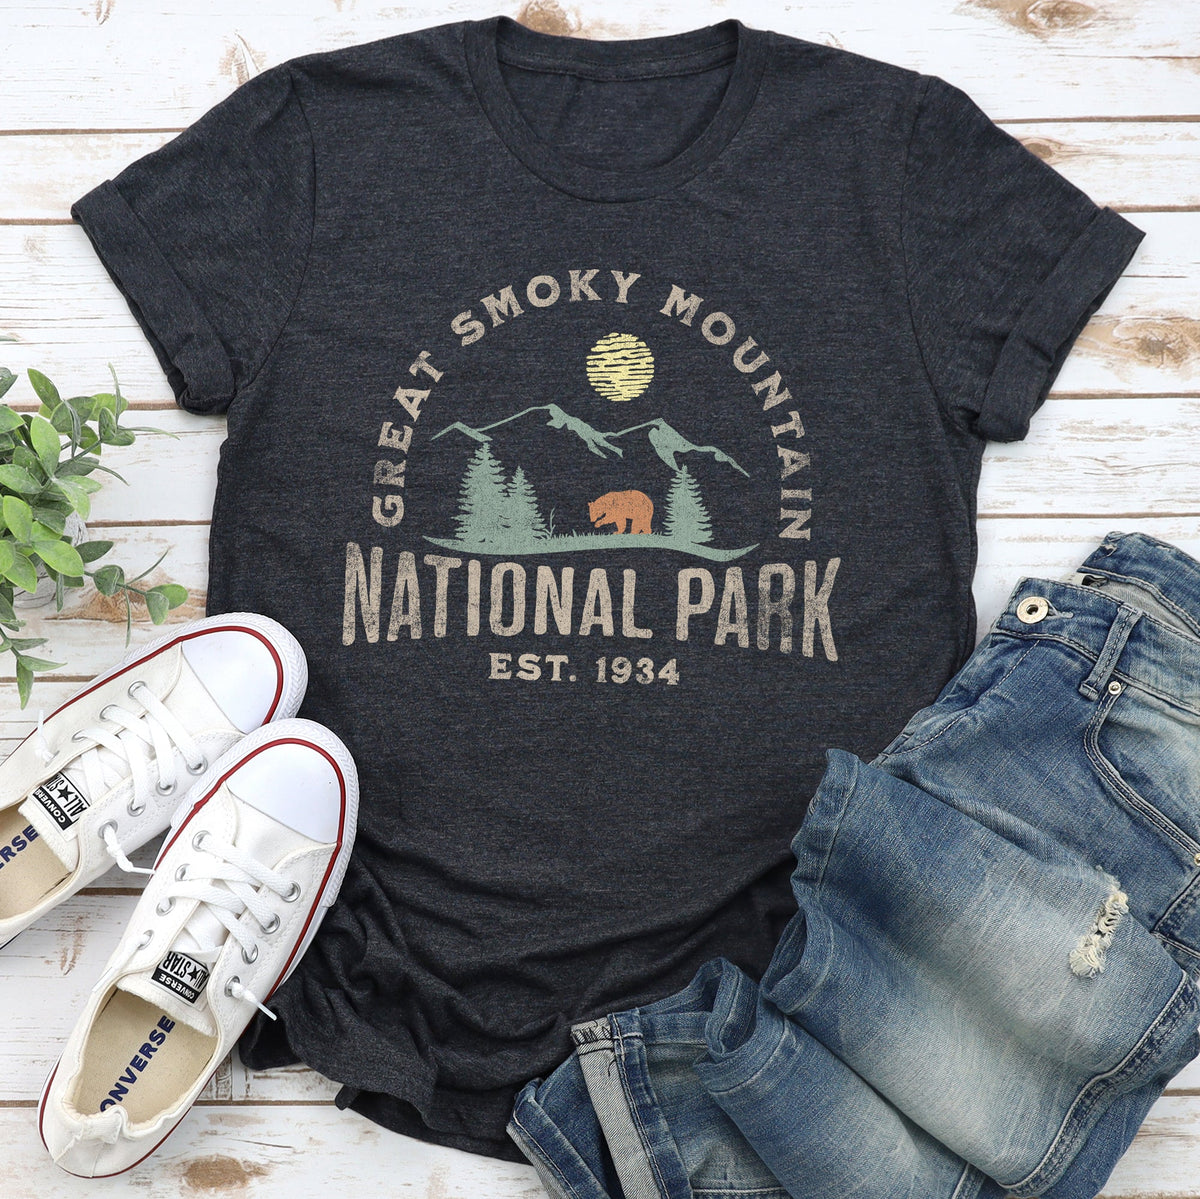 Superweiches T-Shirt des Great Smoky Mountain National Park